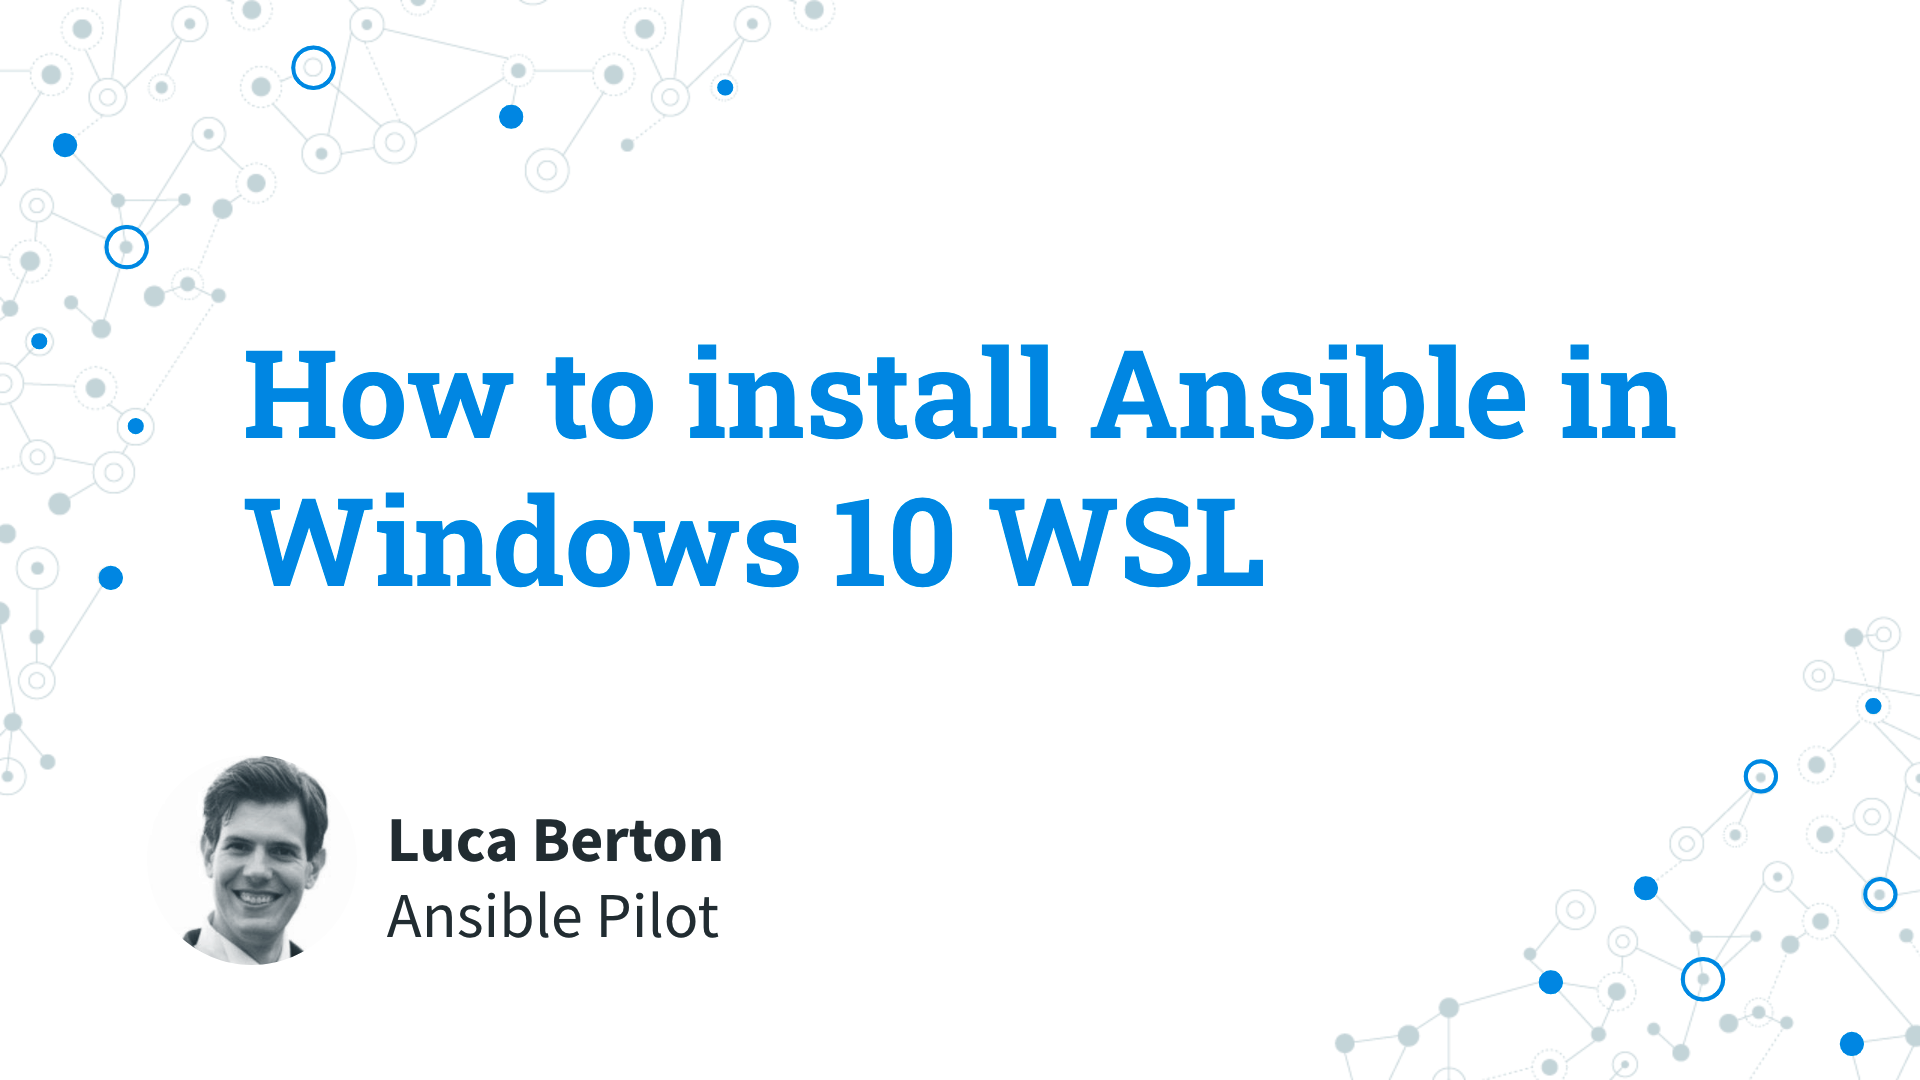 How to install Ansible in Windows 10 WSL Windows Subsystem for Linux - Ansible install